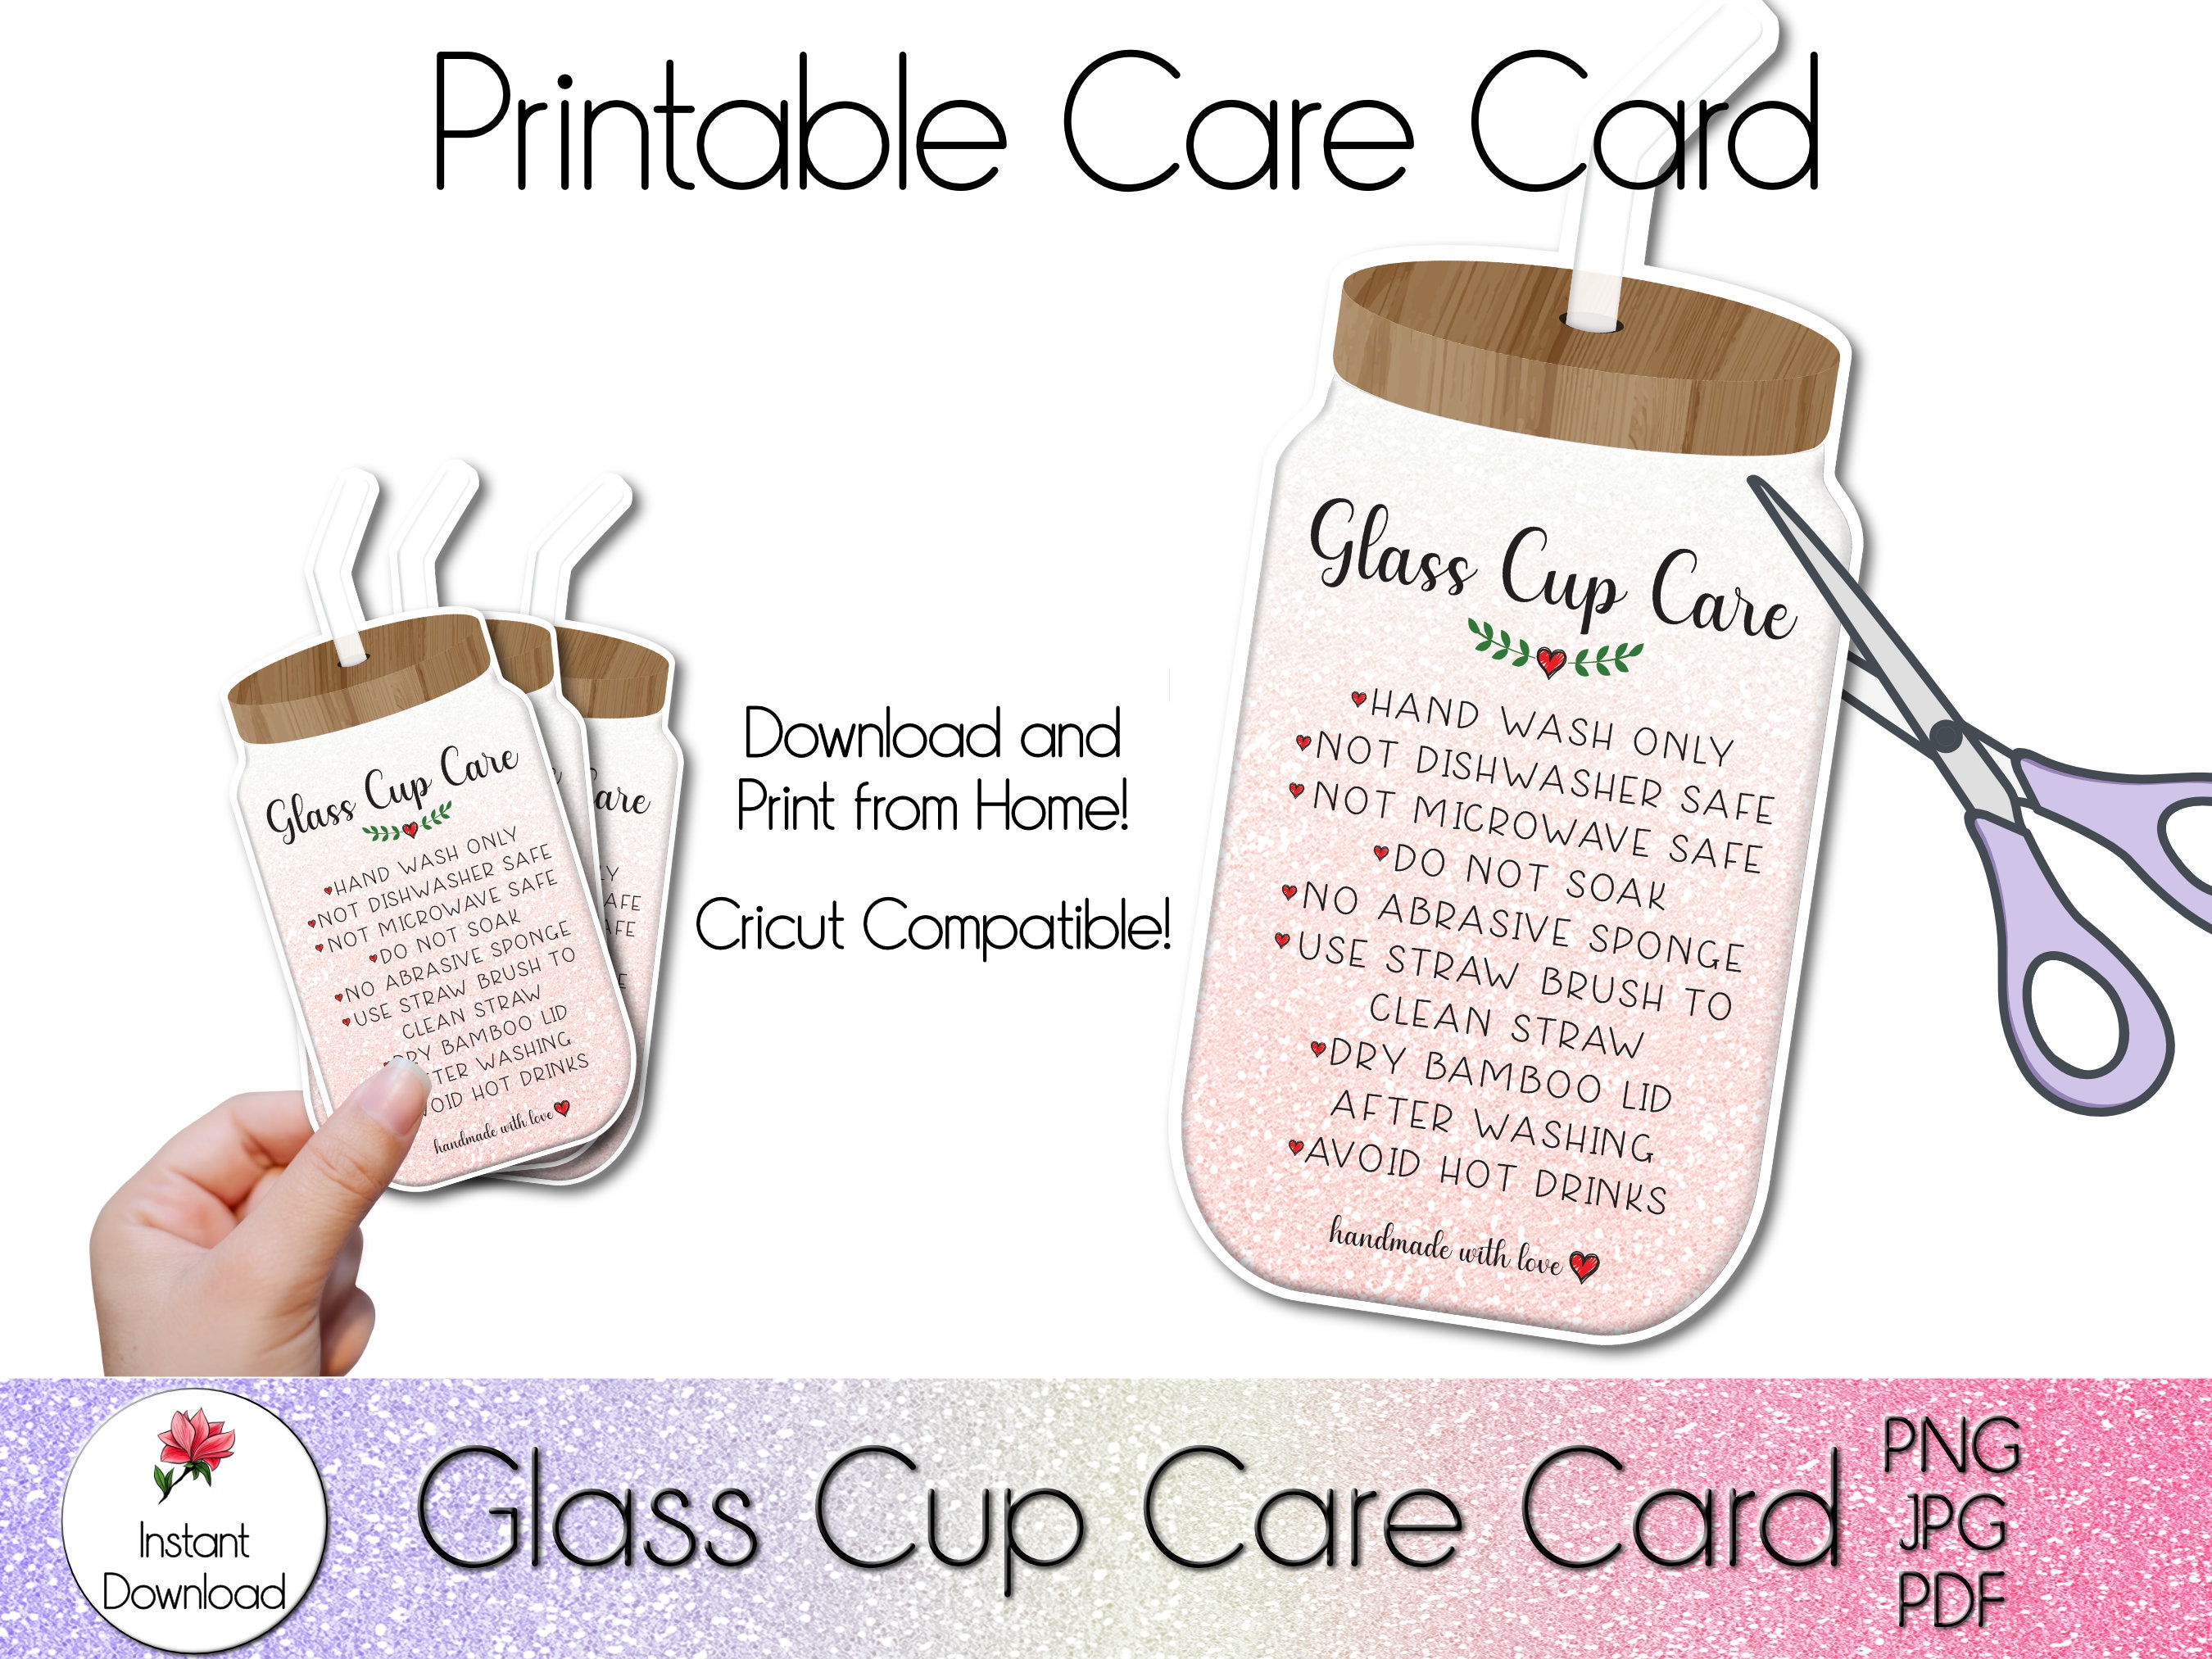 21 cards with free printable tumbler care instructions, download